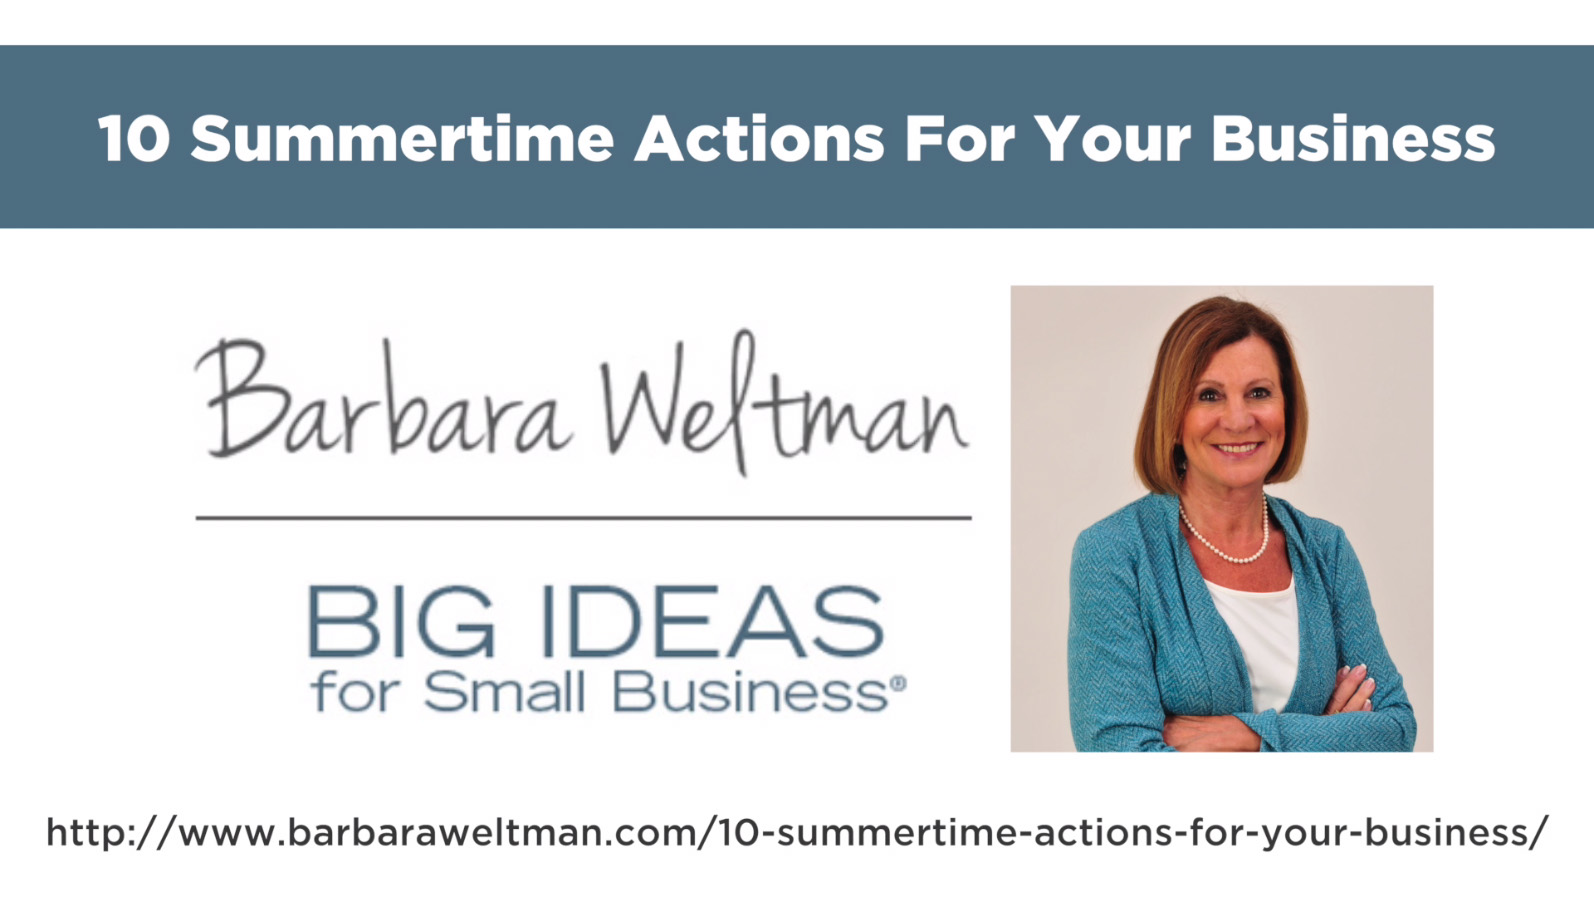 Video - 10 Summertime Actions for Your Business